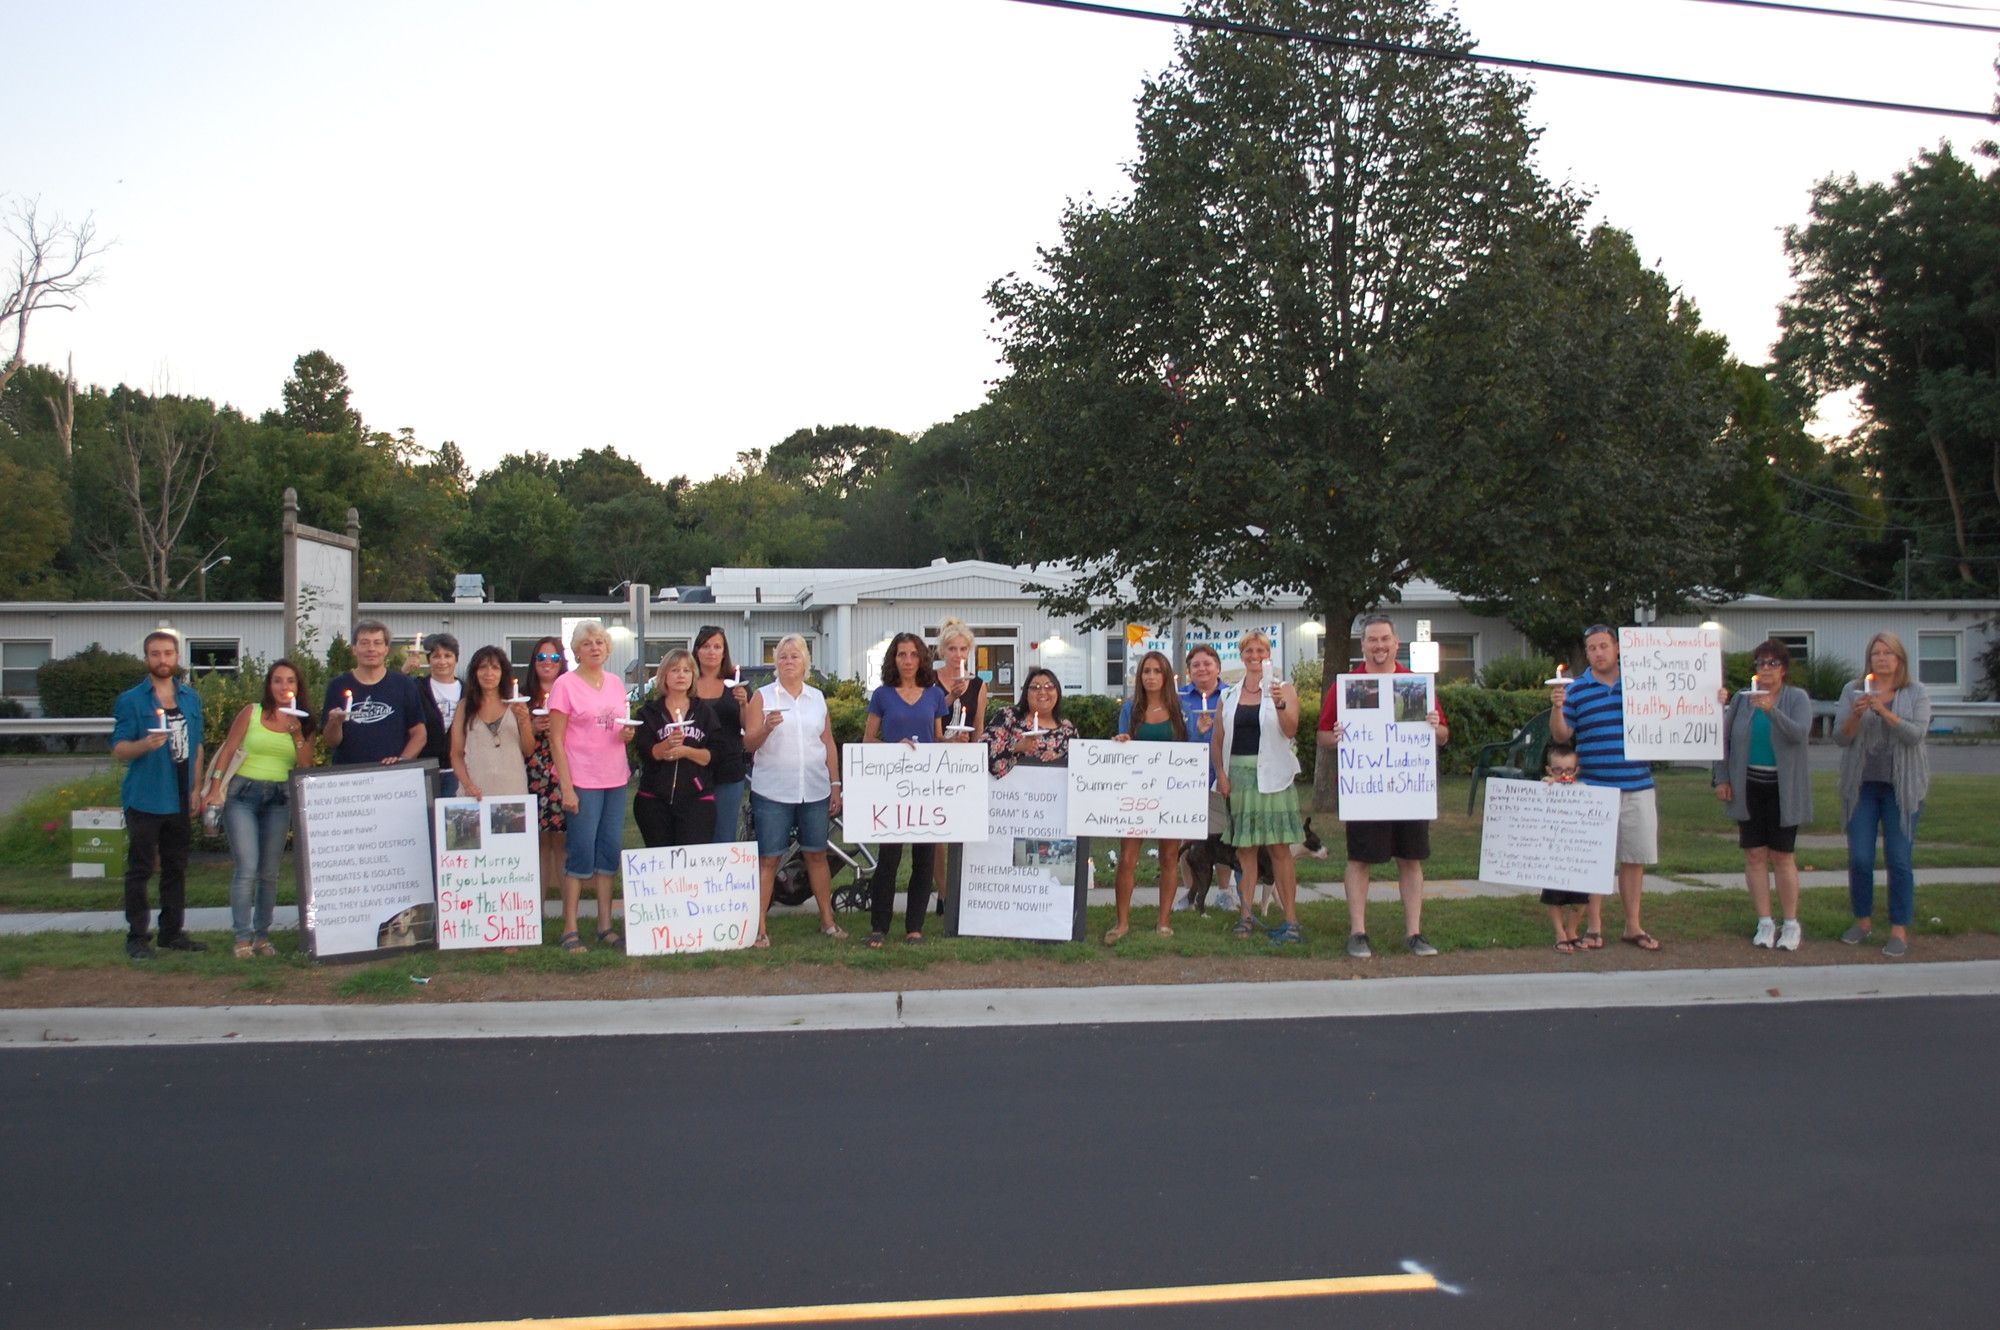 A group of animal activists gathered outside of the Town of Hempstead Animal Shelter in Wantagh on Aug. 26 calling for a change in leadership.